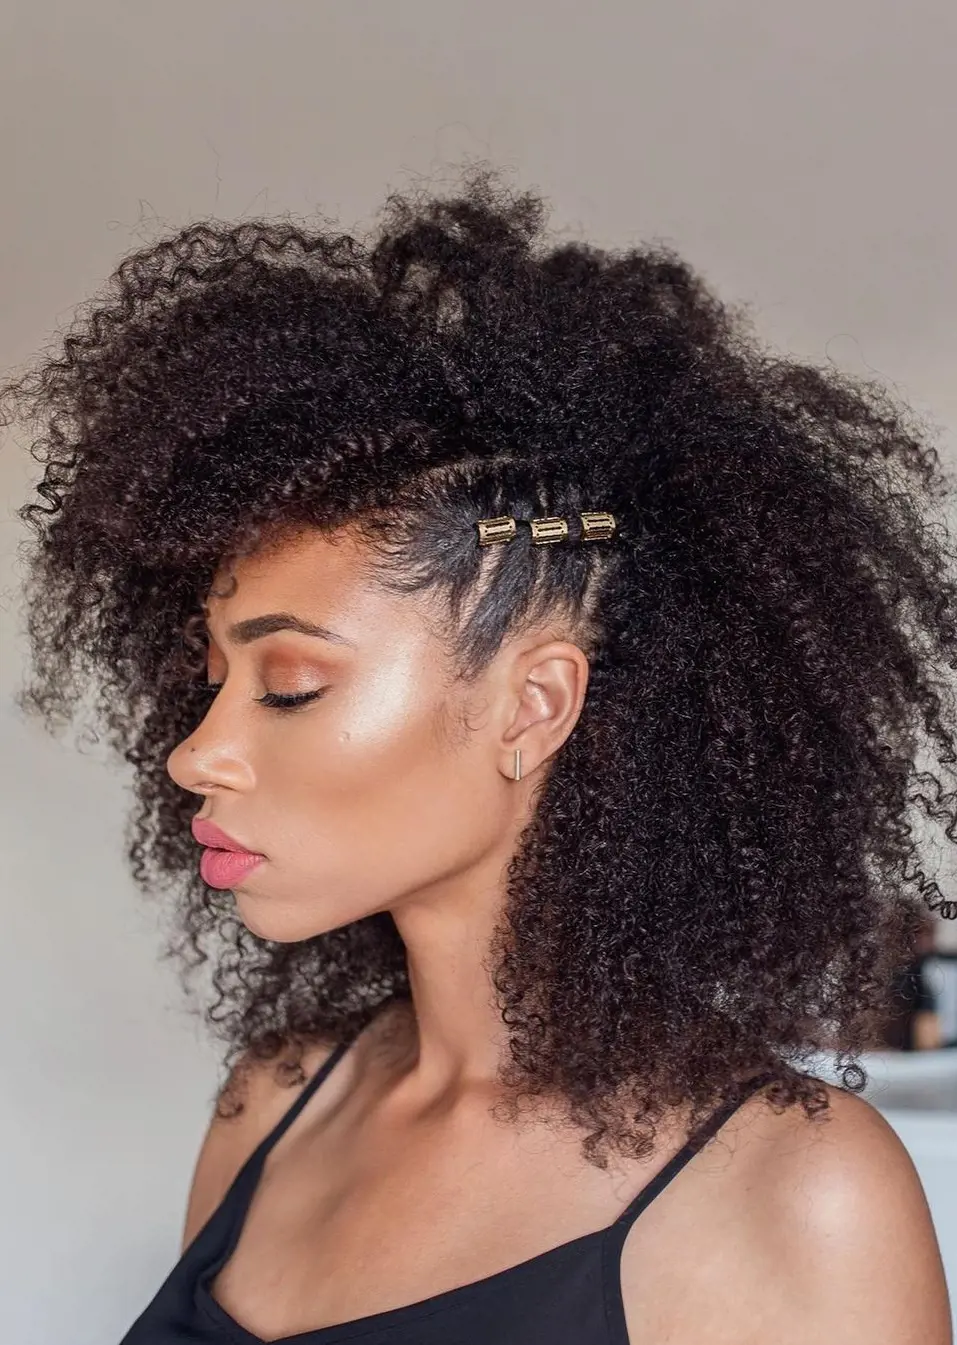  Style your hair with your clips by only clipping it on the side part, that smash your curls and highlight your beautiful face